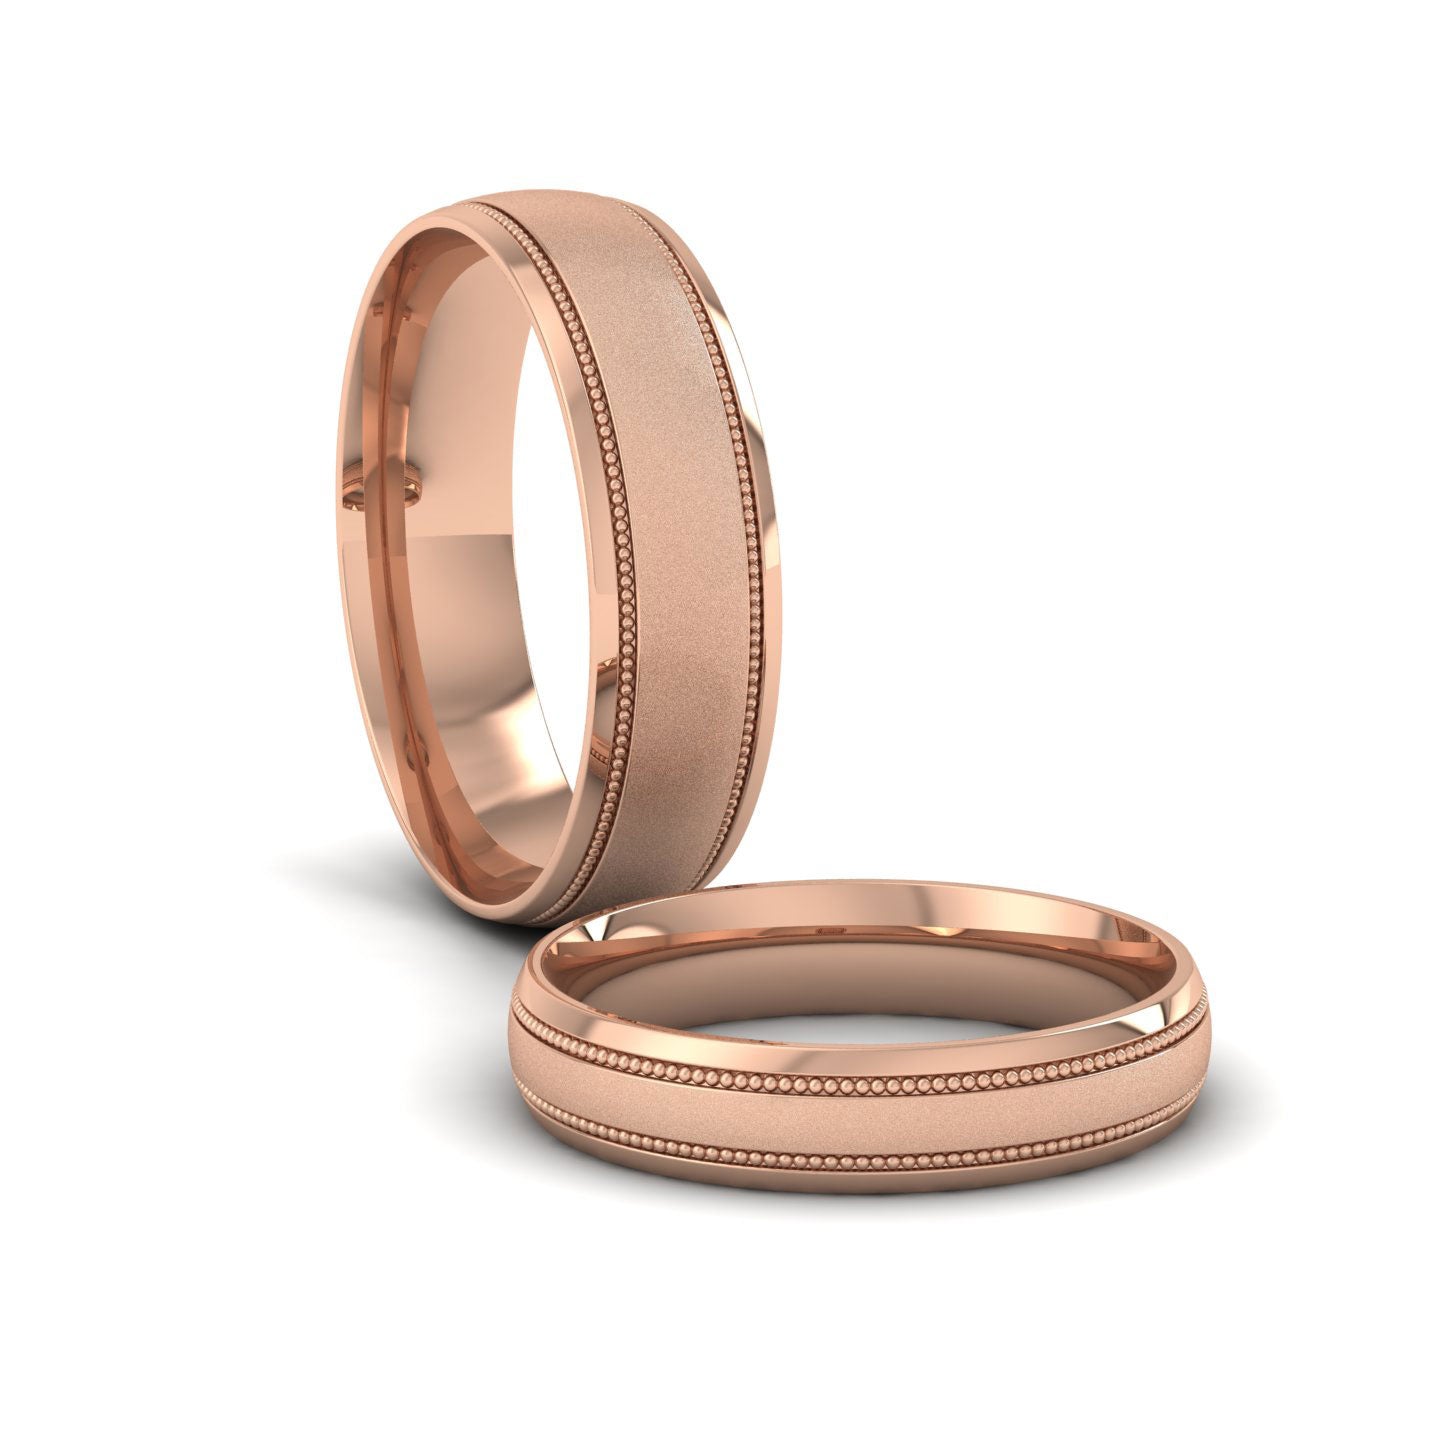 Millgrain And Contrasting Matt And Shiny Finish 18ct Rose Gold 4mm Wedding Ring